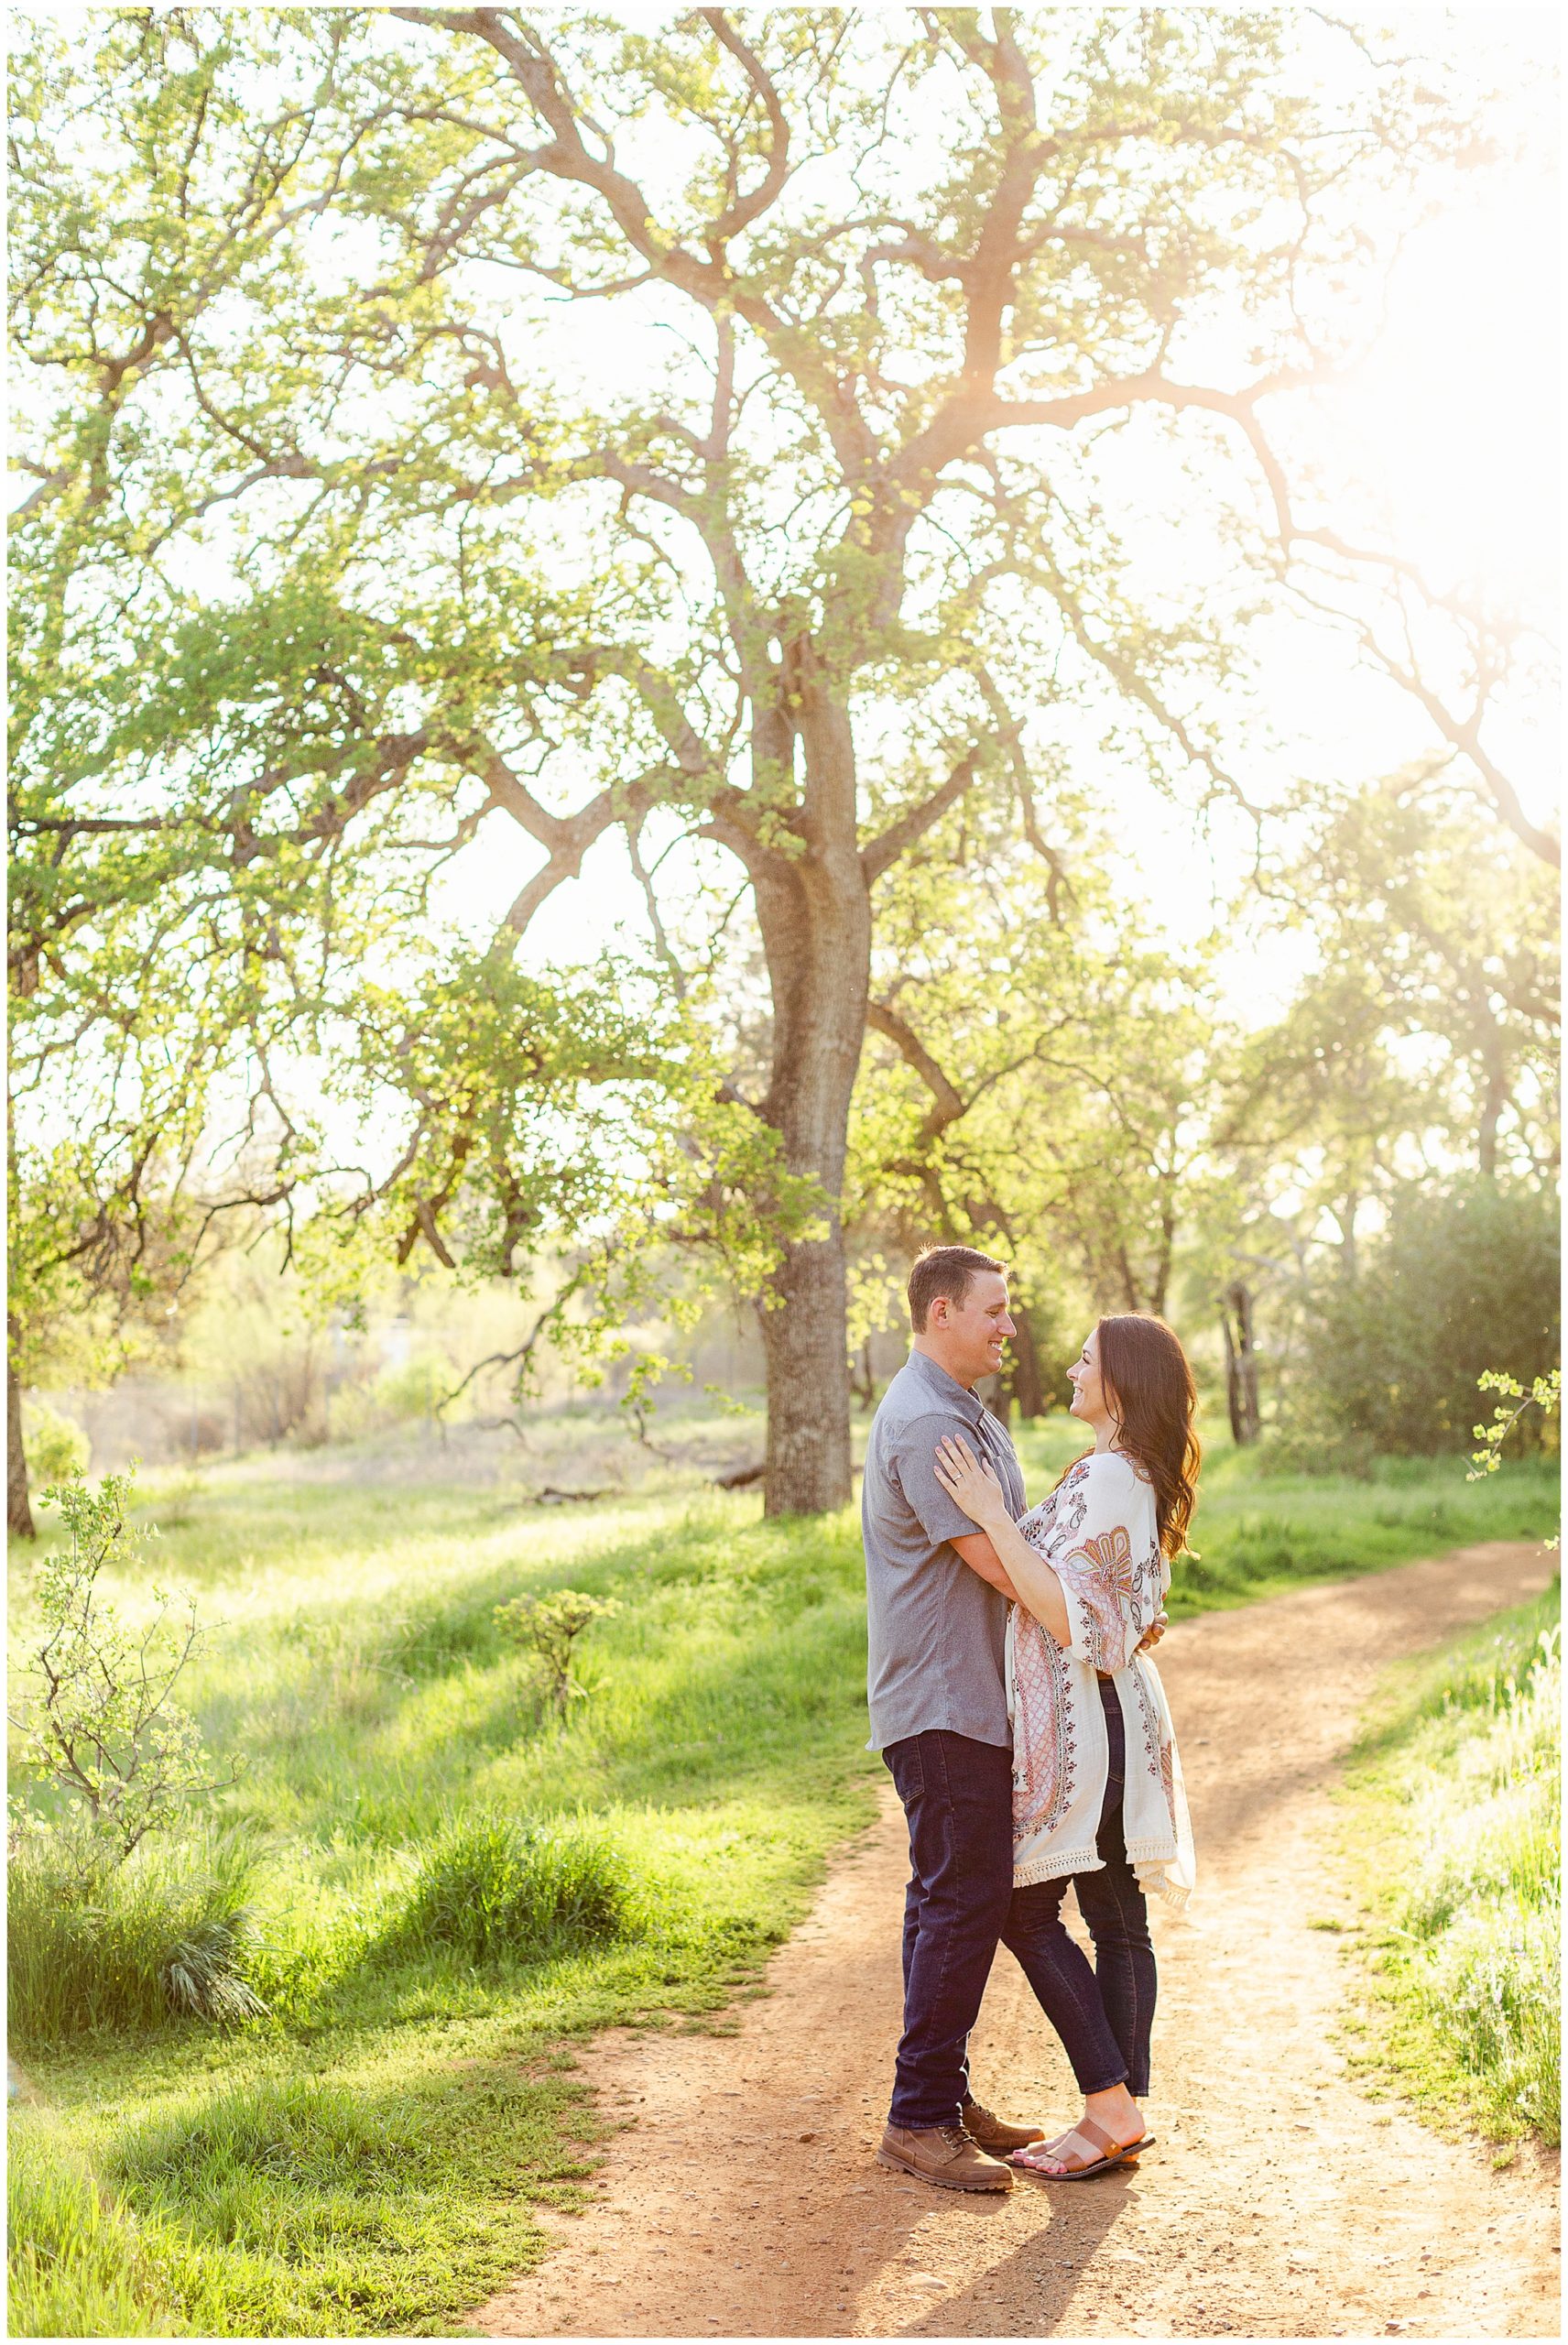 Upper Bidwell Park Engagement Session Chico CA Champagne Blanket,